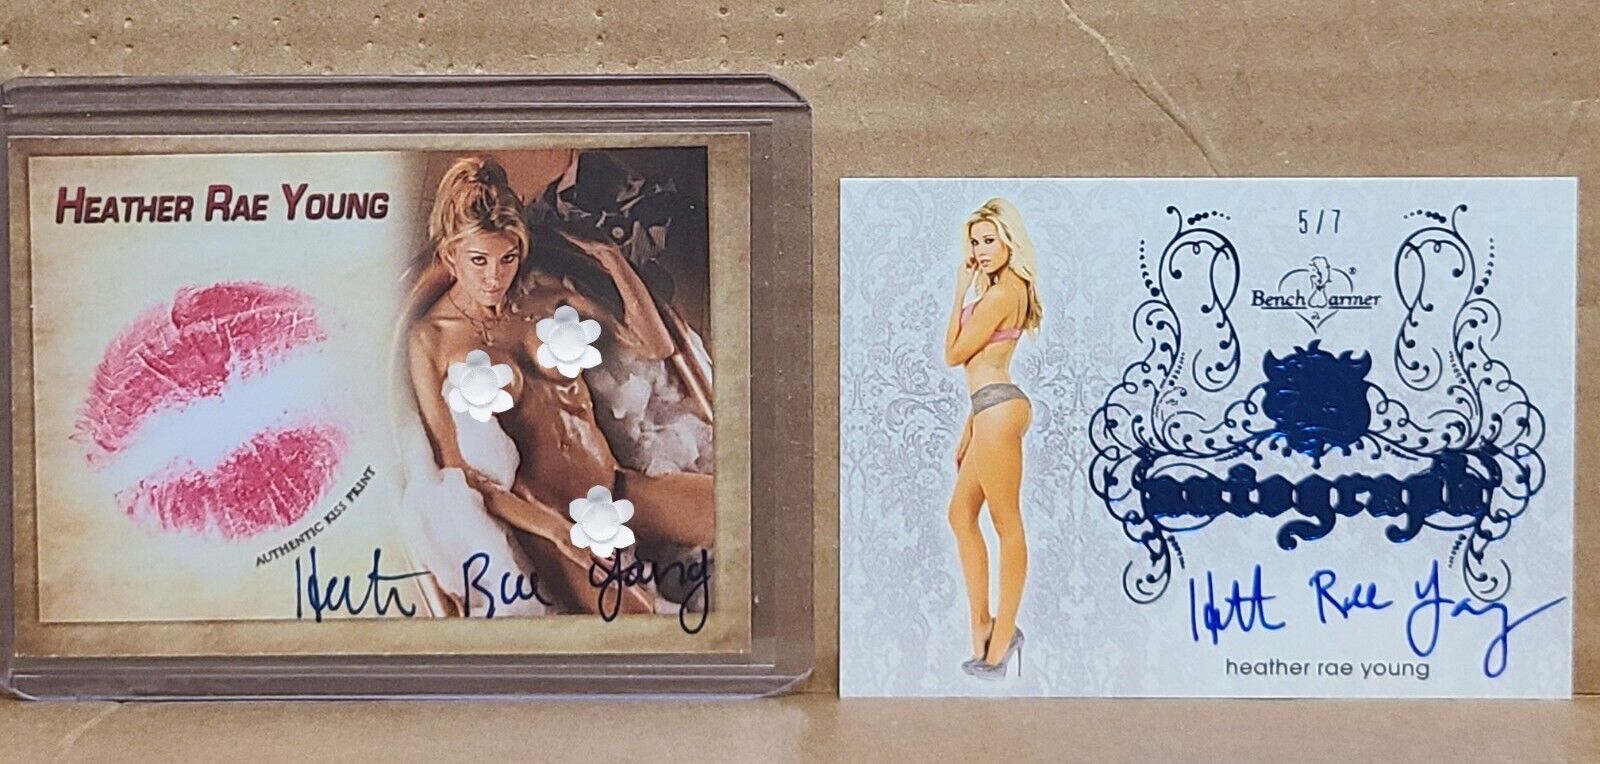 Heather Rae Young Kiss and Autograph Cards